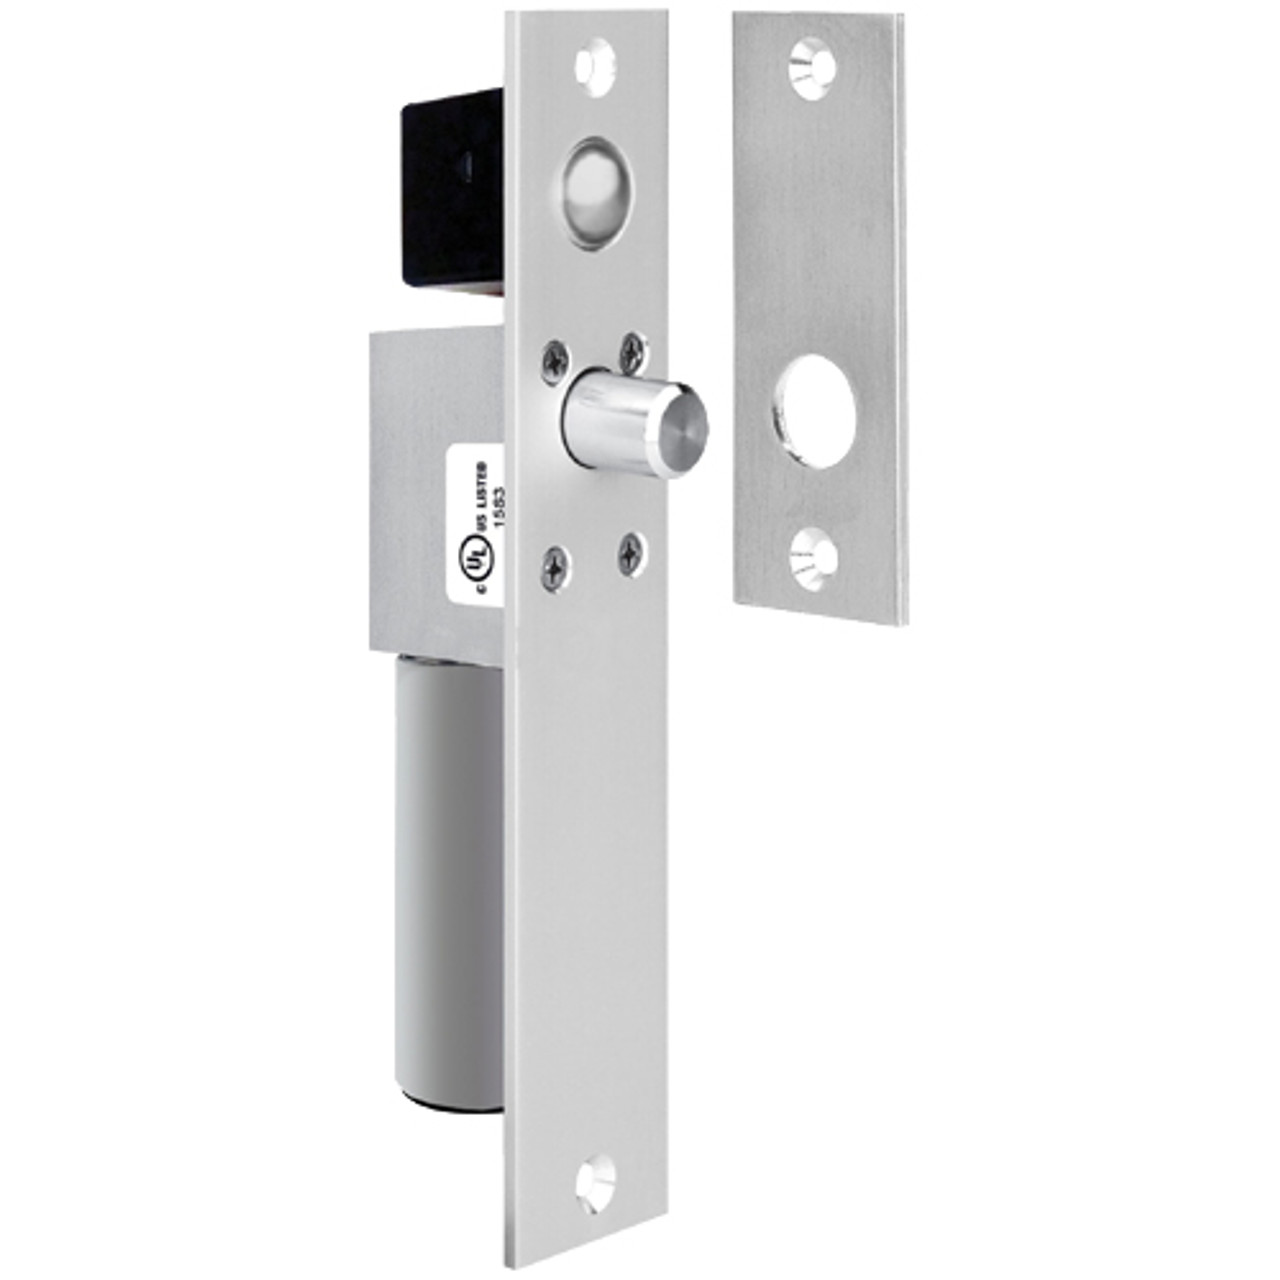 1490AIVD SDC Fits 1-1/2 inche Frame Non UL FailSafe Spacesaver Mortise Bolt Lock with Door Position Sensor in Aluminum